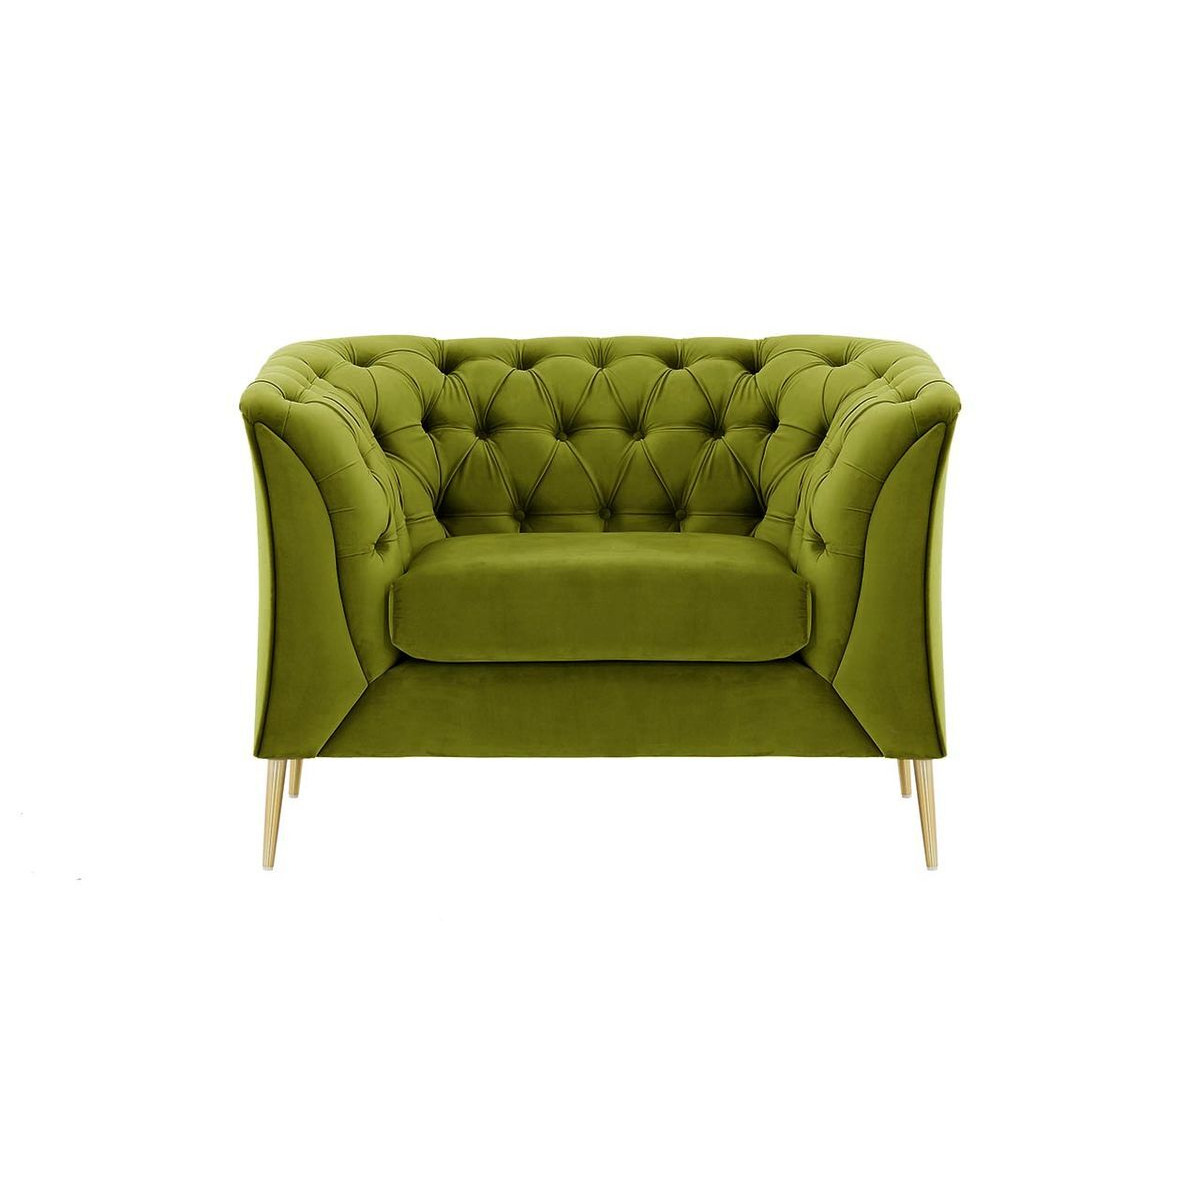 Chesterfield Modern Armchair, olive green, Leg colour: gold metal - image 1